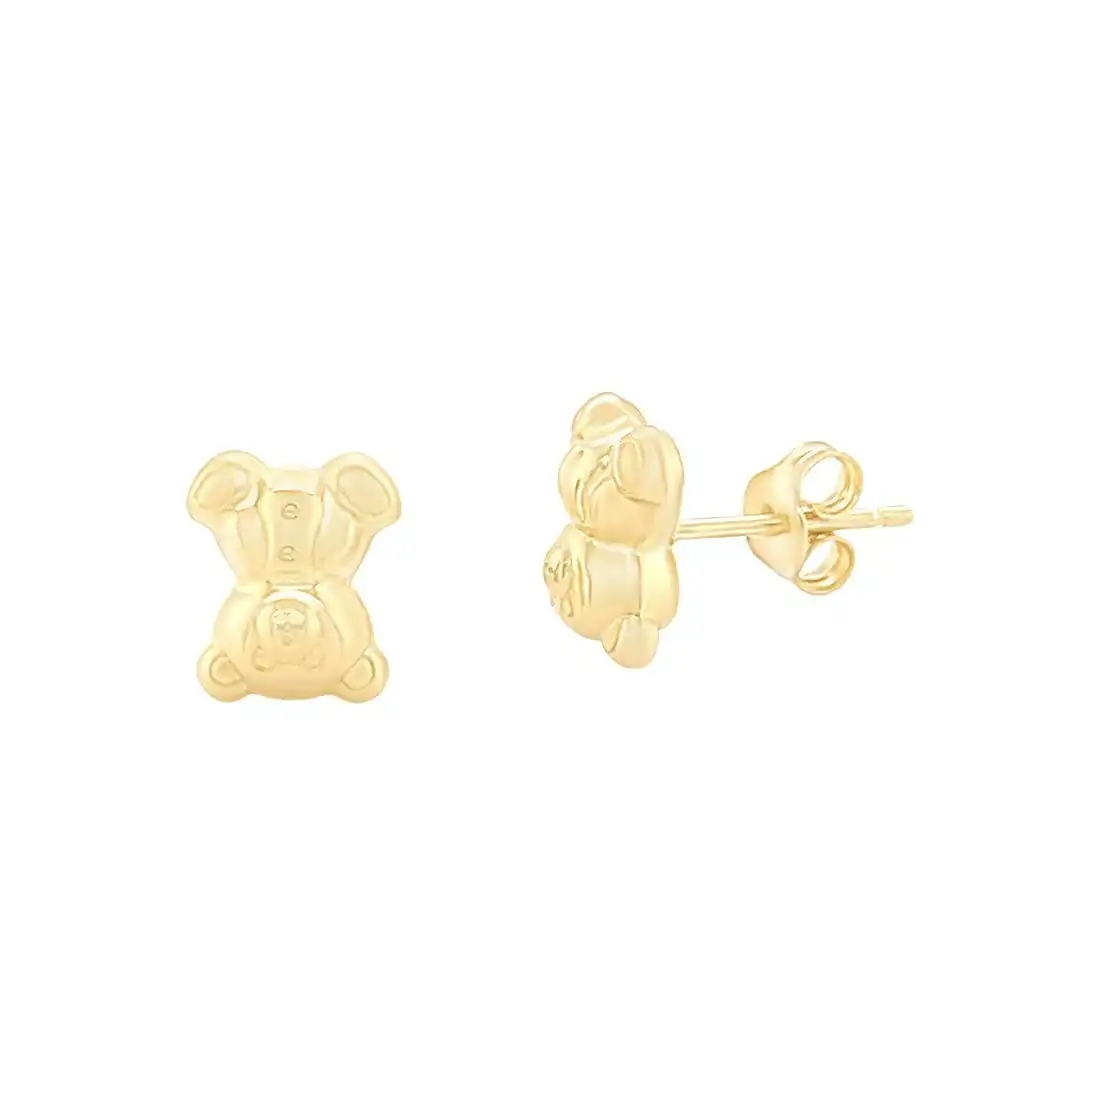 Children's Teddy Bear Stud Earrings in 9ct Yellow Gold Silver Infused